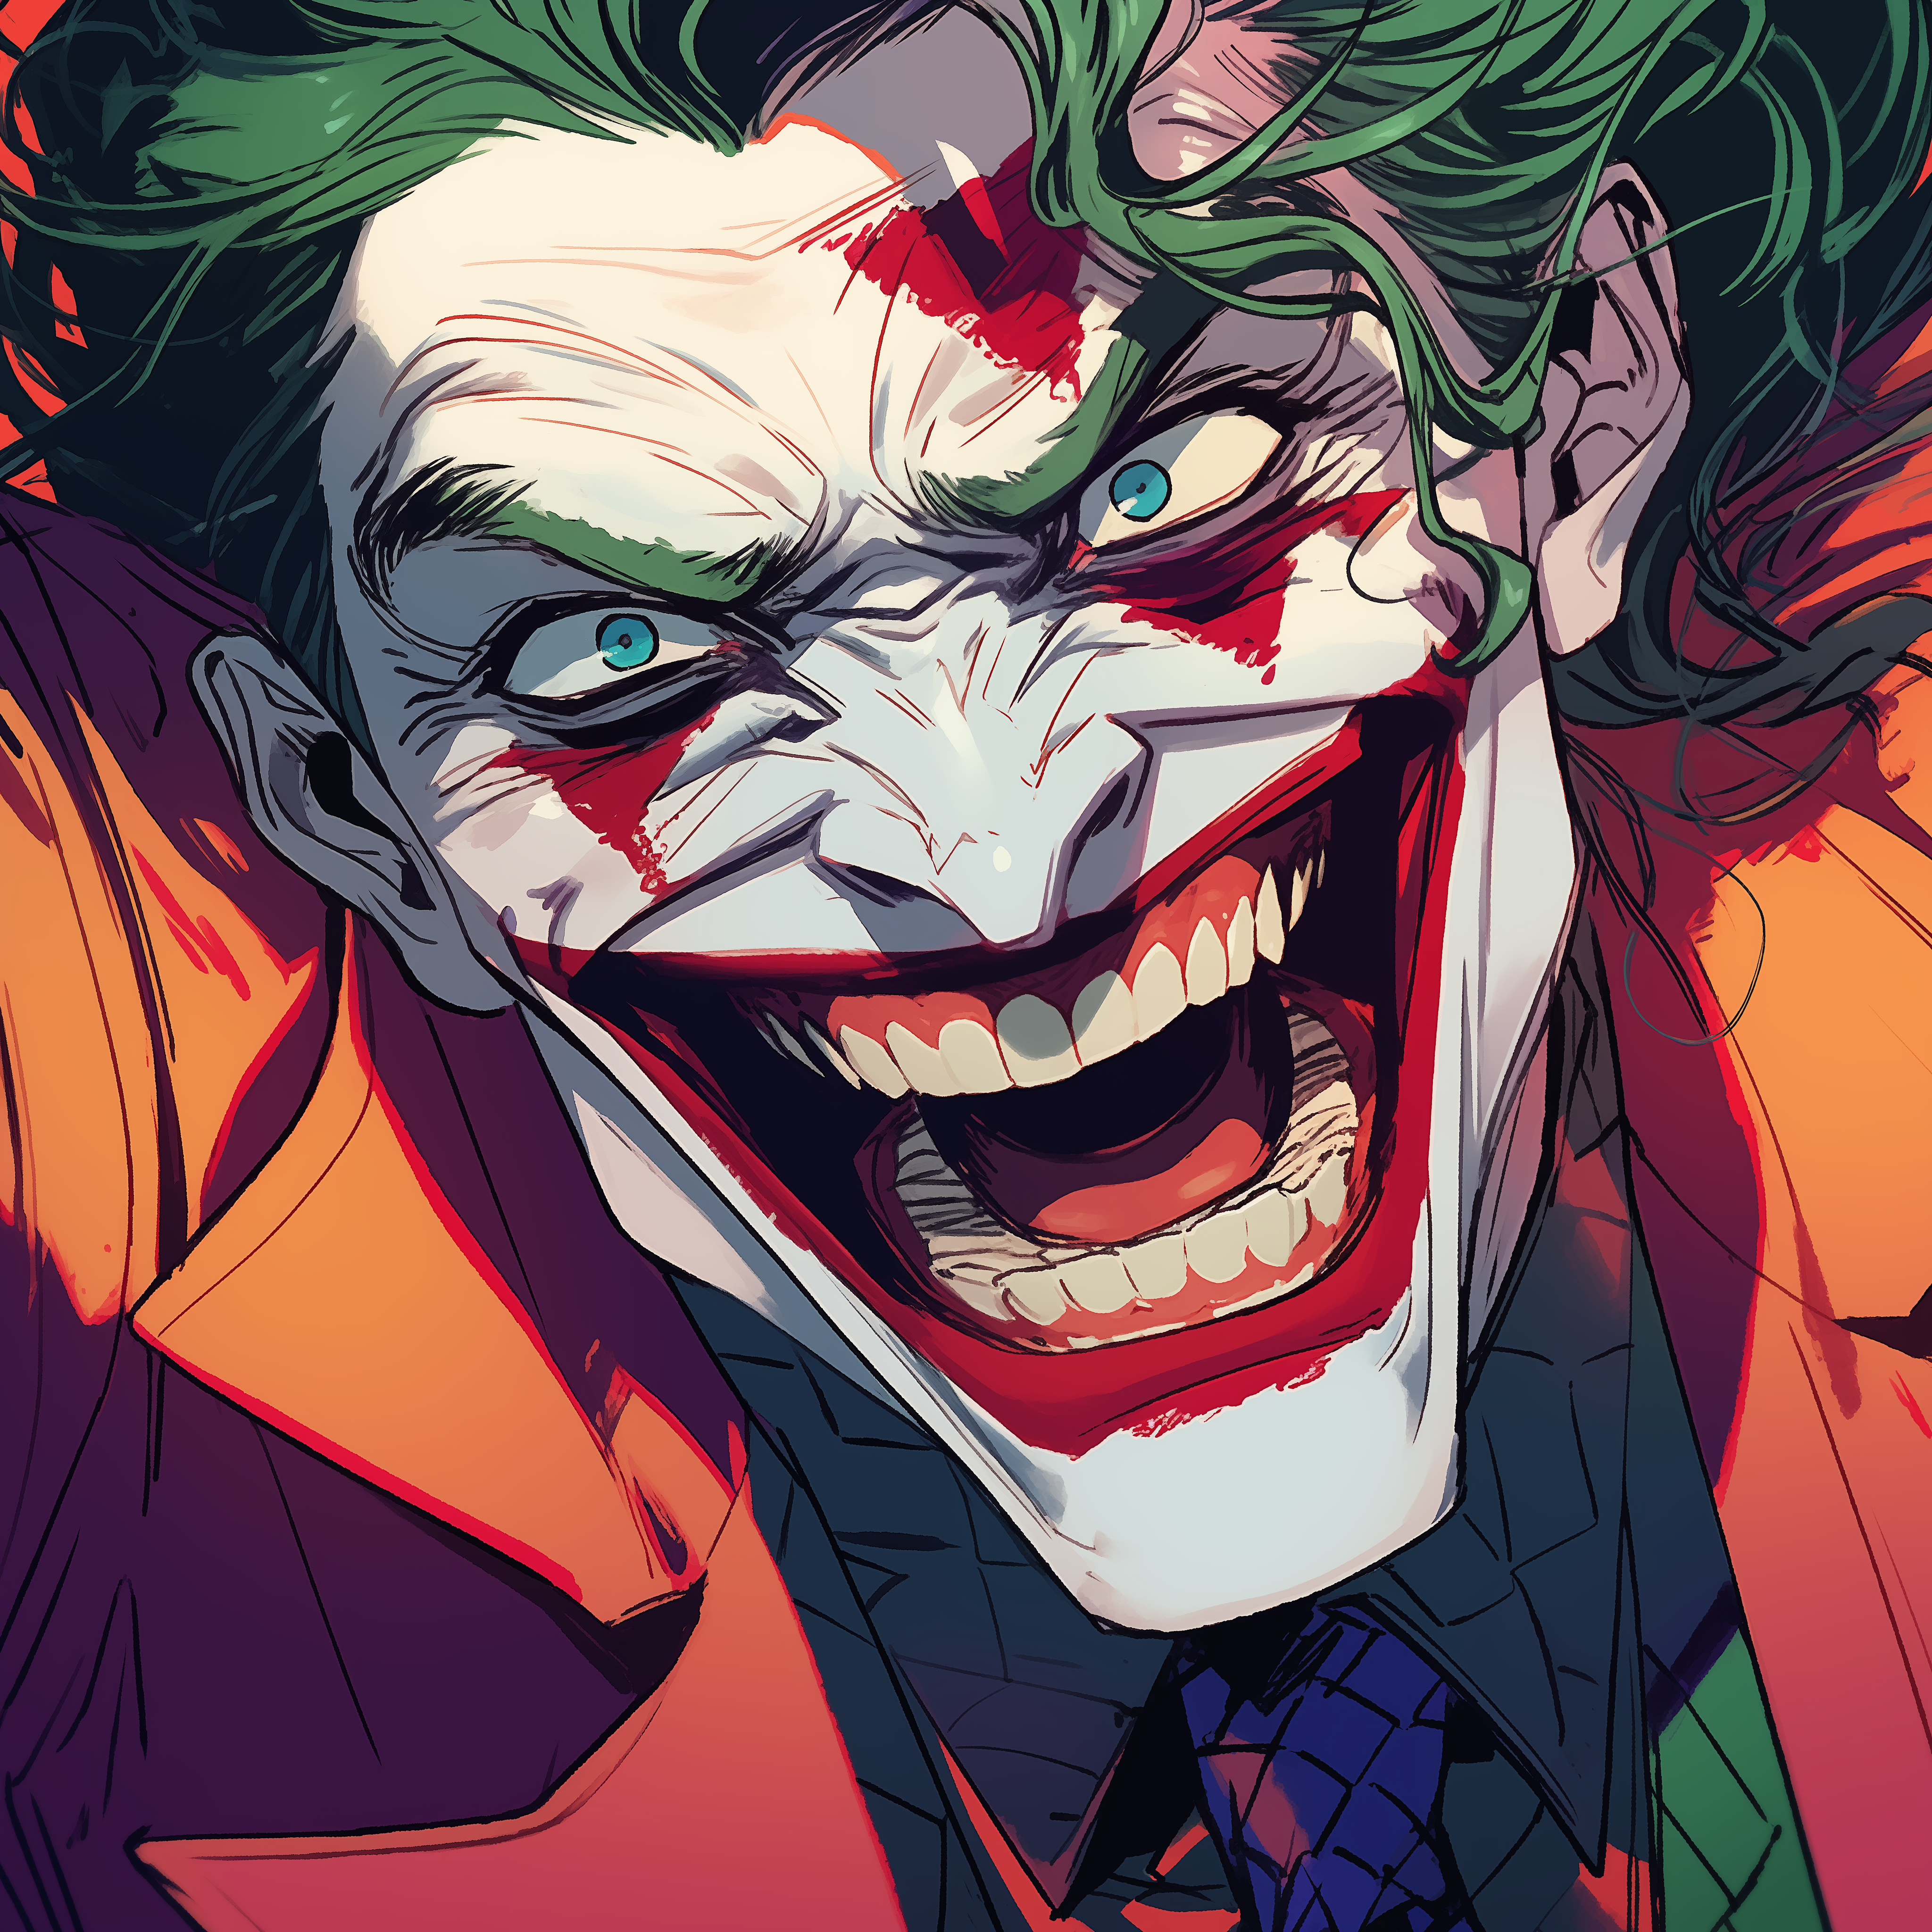 Avatar of the iconic Joker character from DC Comics, displaying his menacing grin and vibrant purple and green costume.